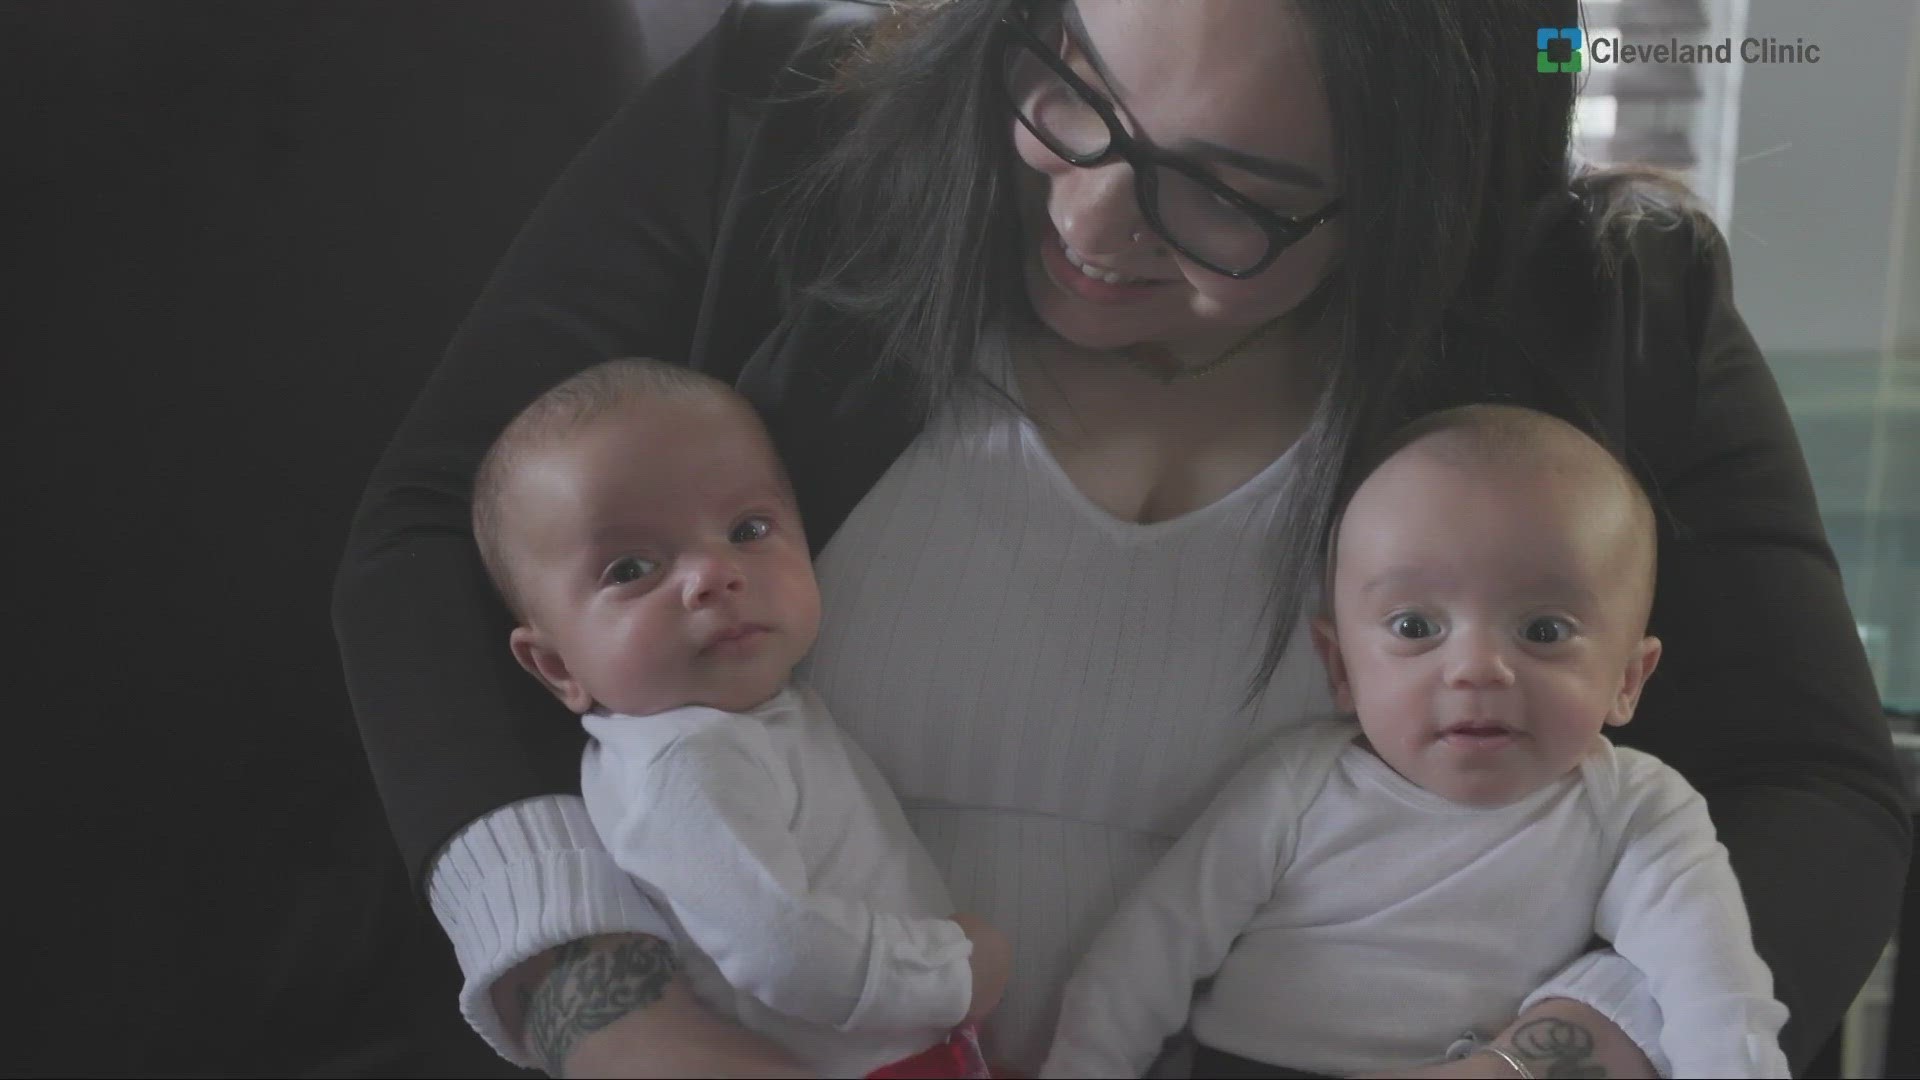 While many moms have reasons to be grateful on Mother's Day, Monica Robins has the story of a woman who just wanted to live long enough to meet her twins.